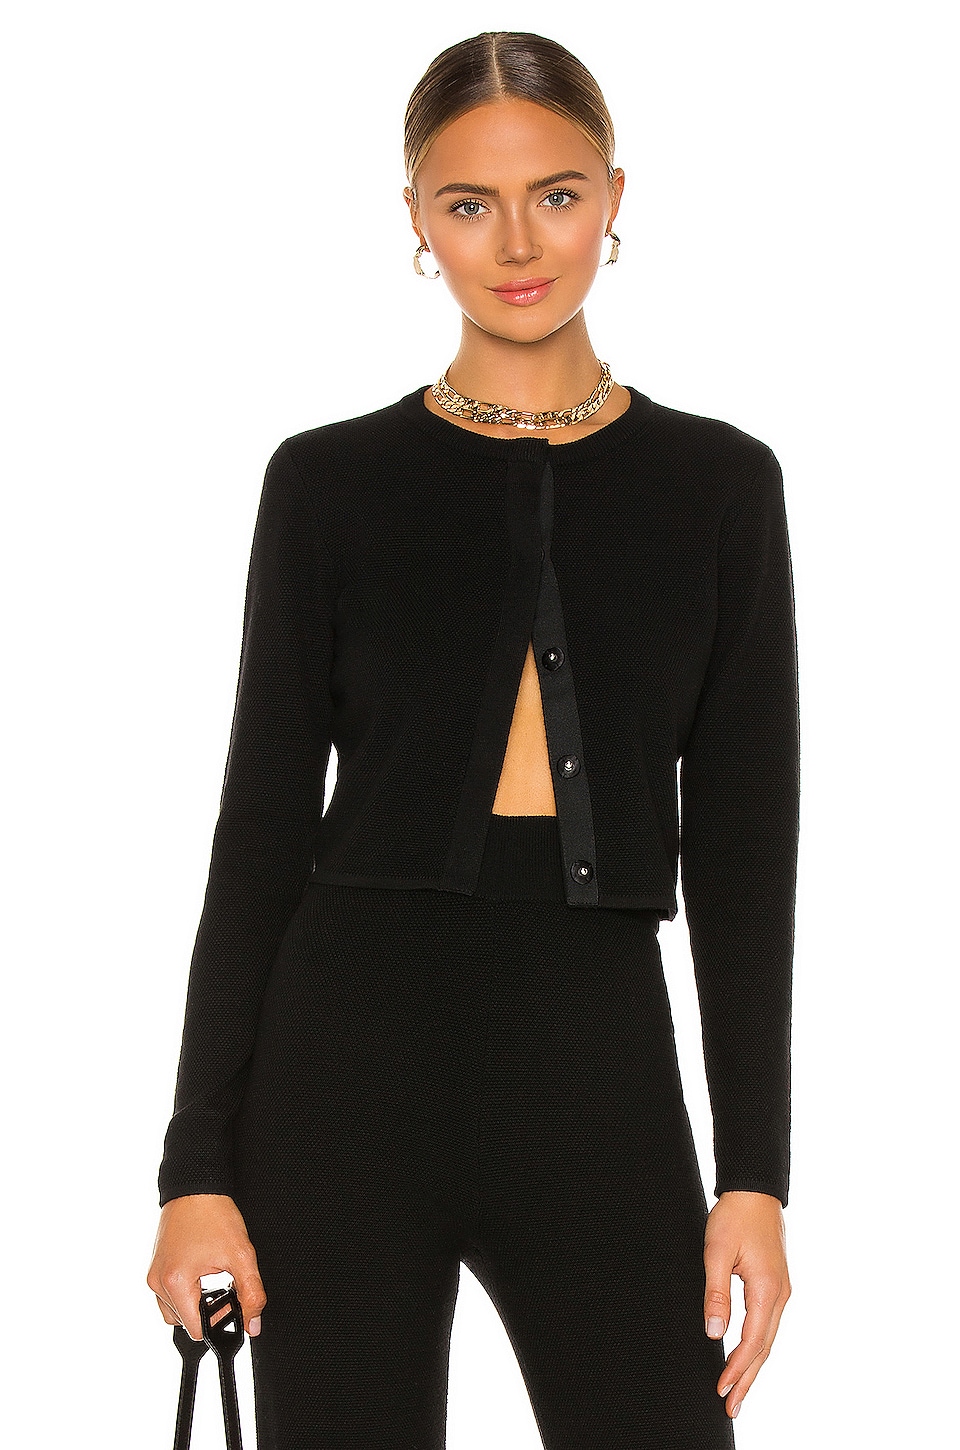 Victor Glemaud X REVOLVE Cropped Open Cardigan in Black | REVOLVE